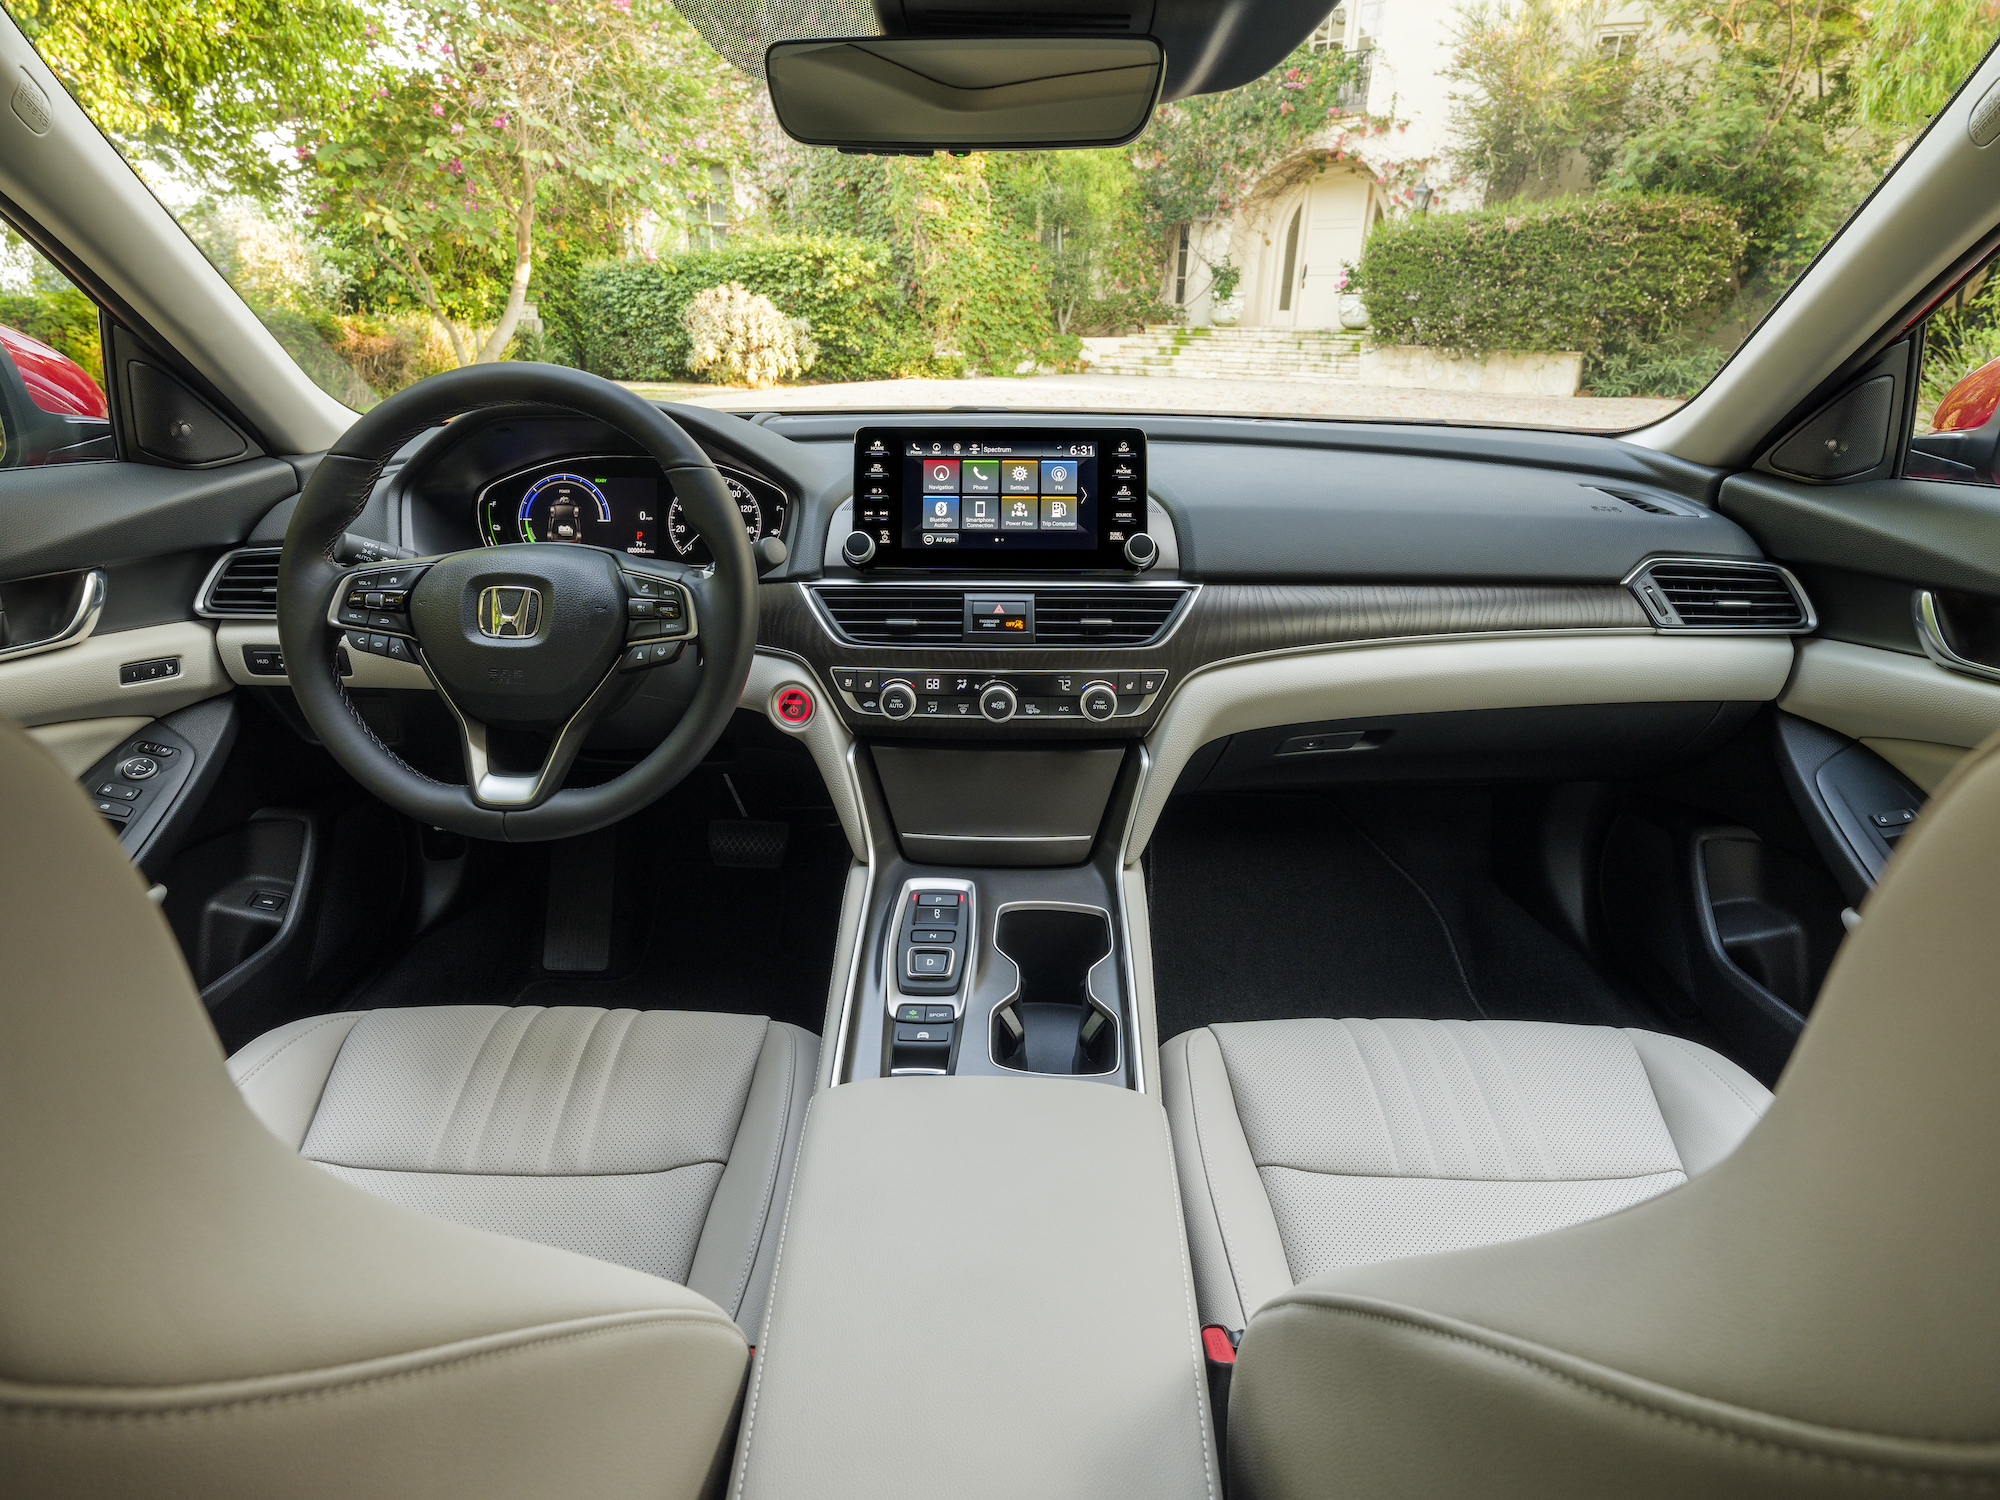 The dashboard, steering wheel and front seats of a 2021 Honda Accord Hybrid